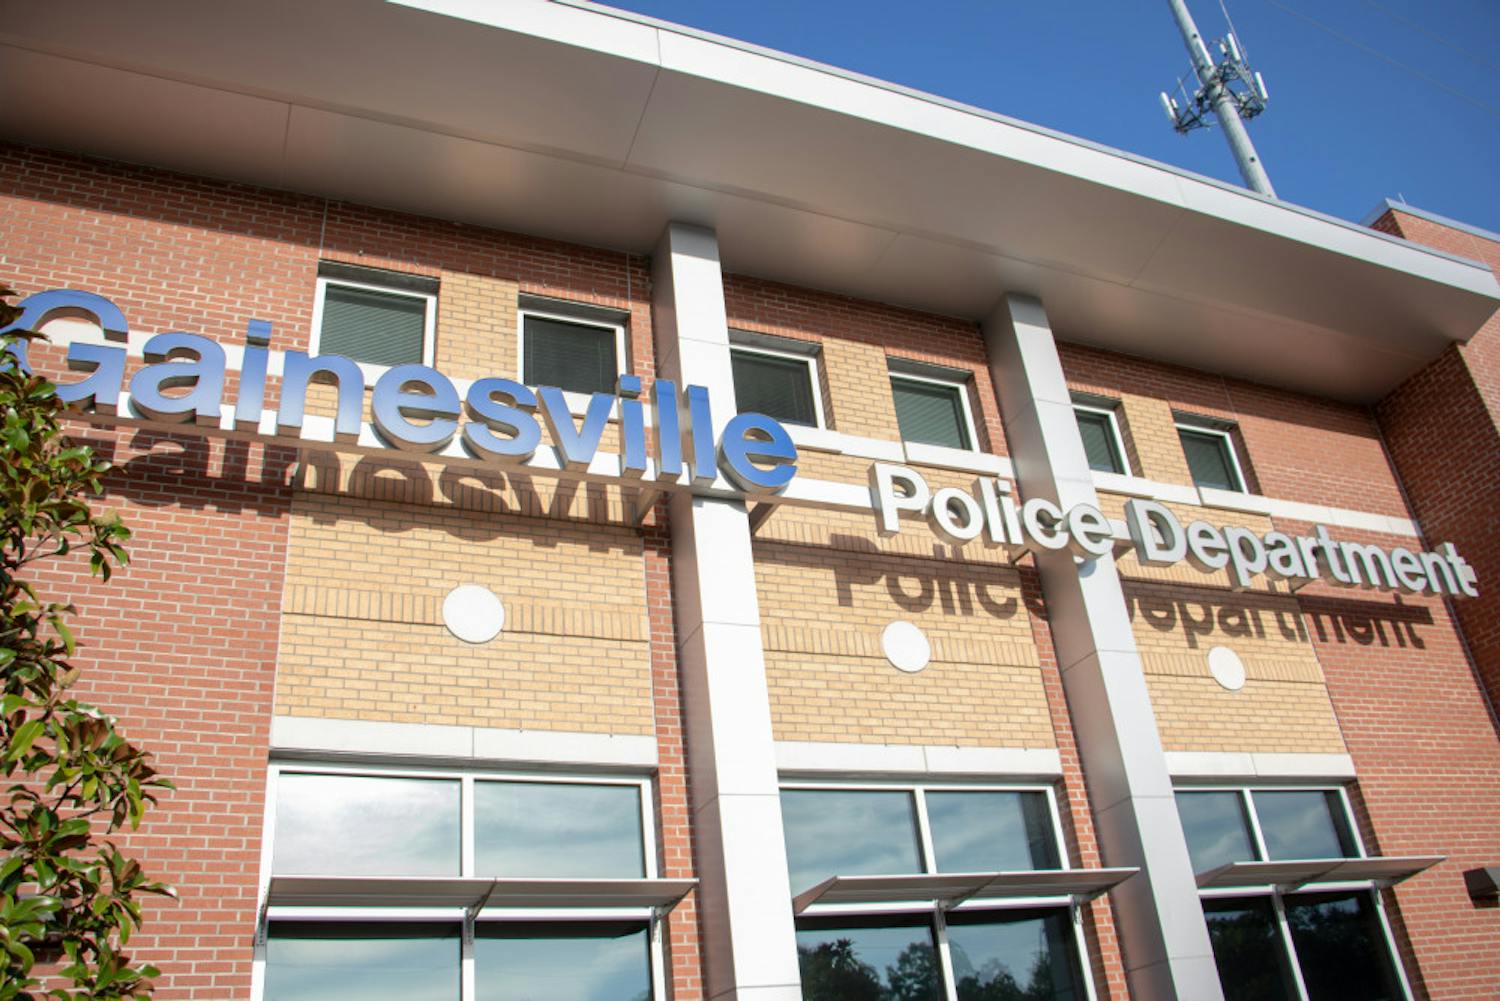 Gainesville Police Department currently has 22 vacancies for officers as contract negotiations for officers on the force are underway. The city and police union are meeting today, and salaries and benefits are on the table.